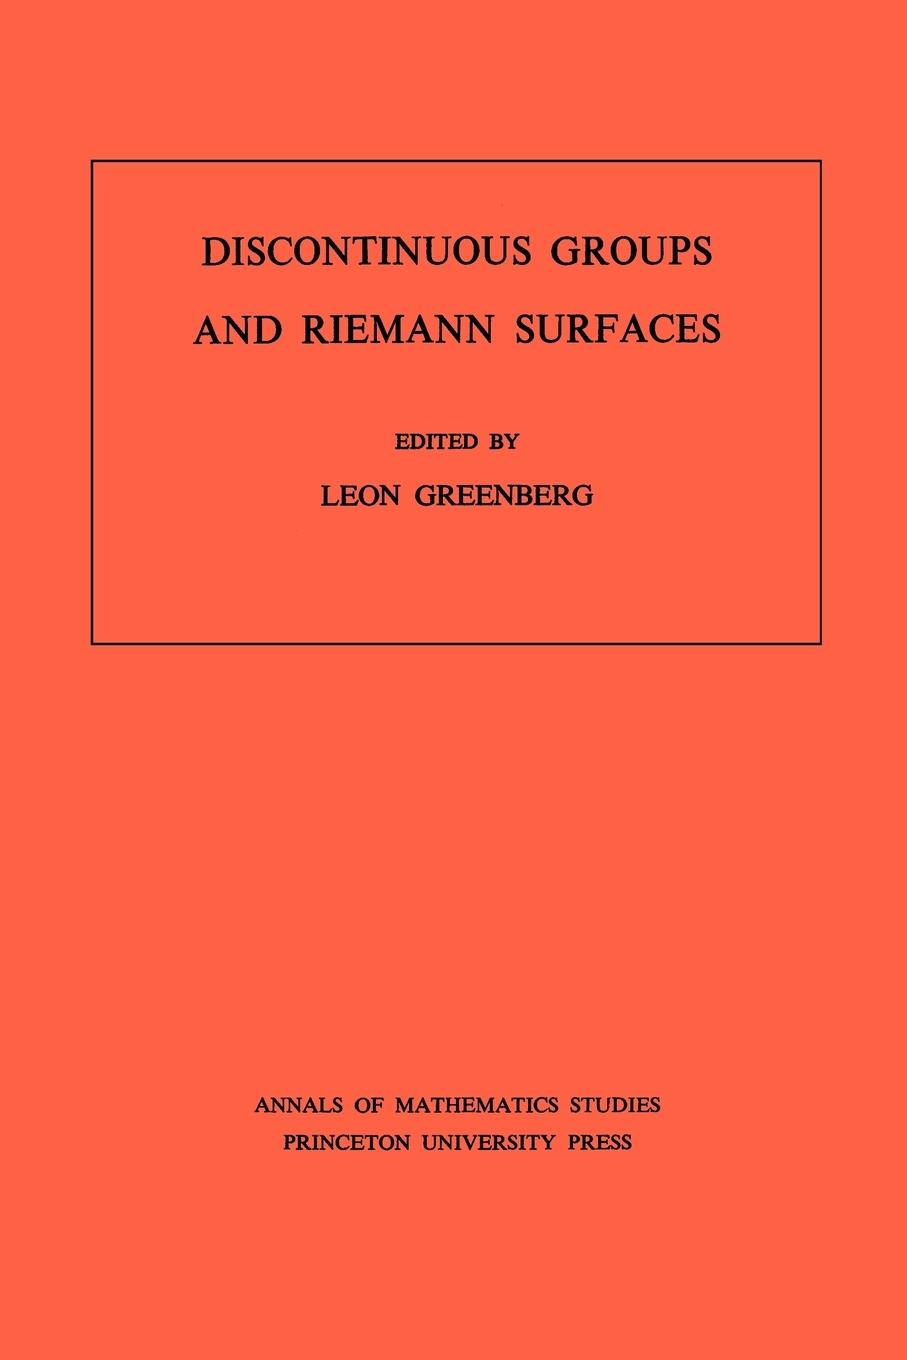 Discontinuous Groups and Riemann Surfaces (AM-79), Volume 79